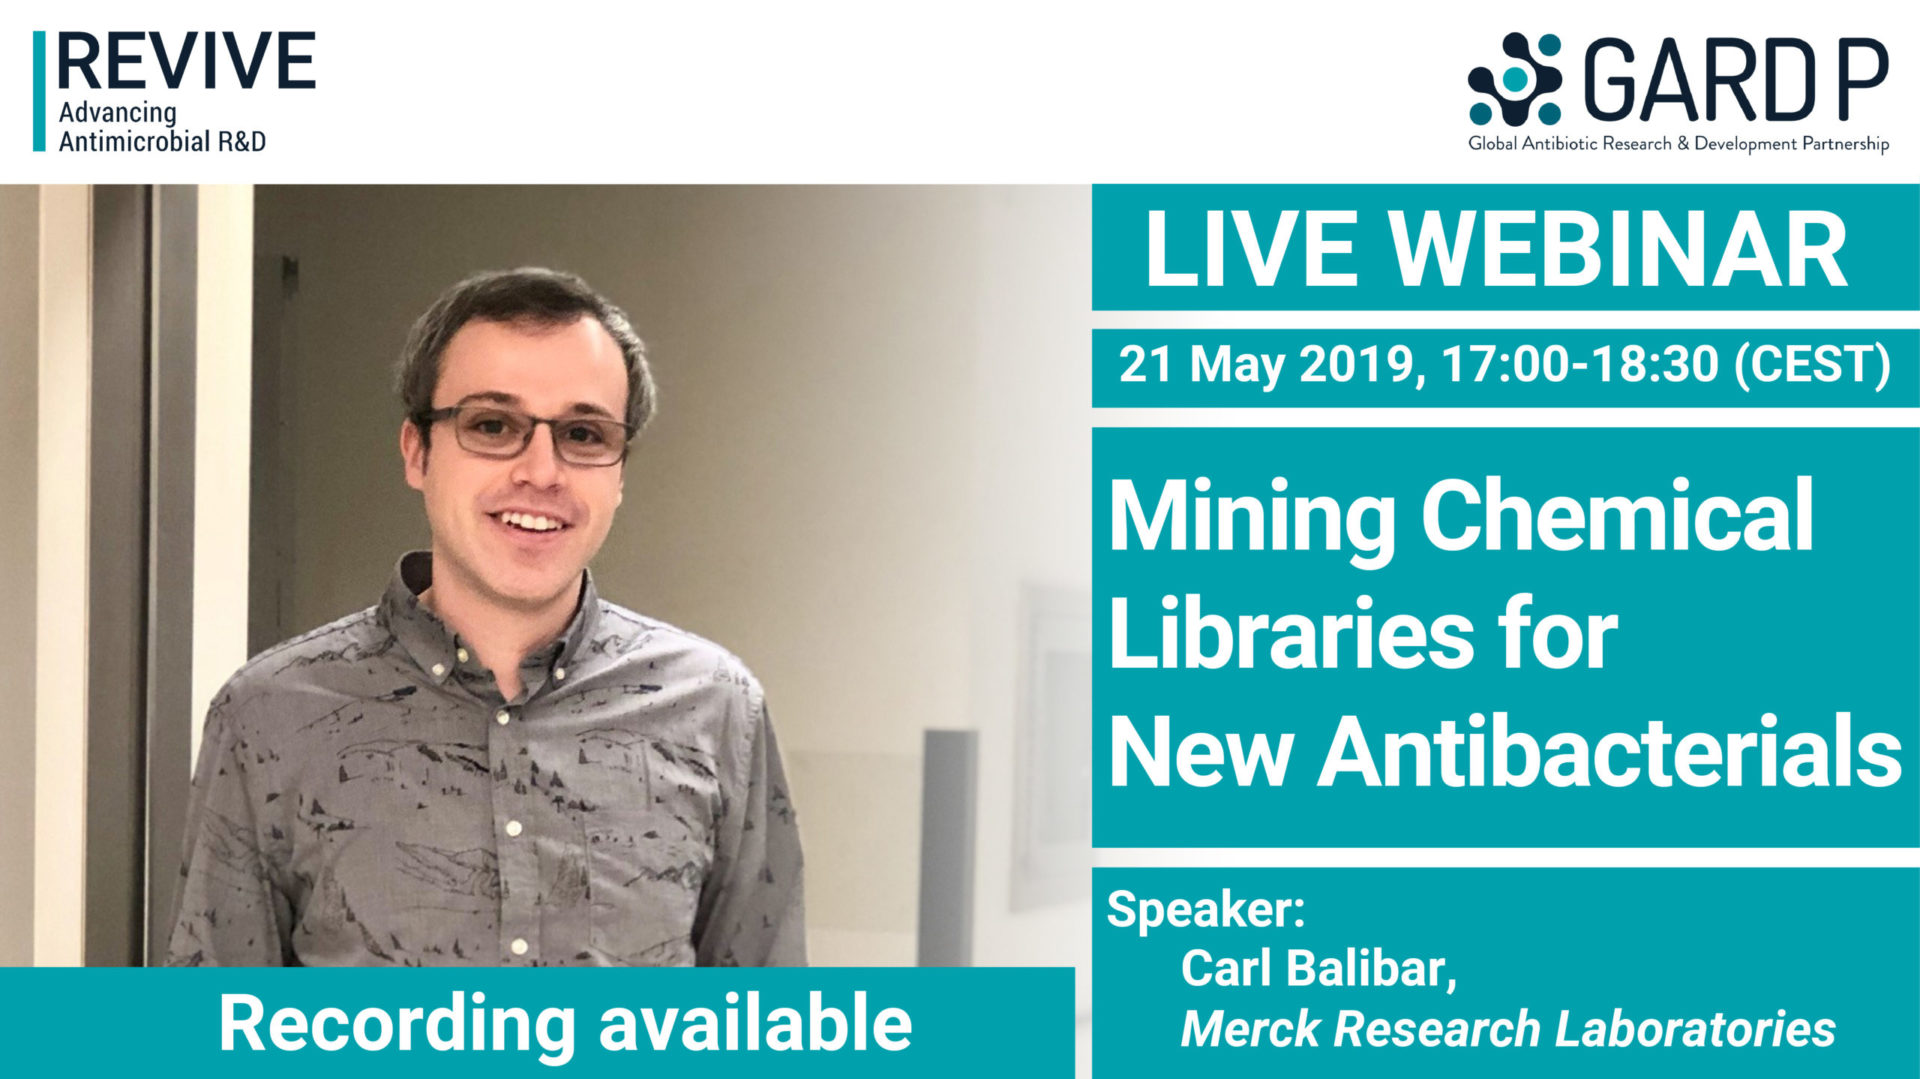 Mining Chemical Libraries for New Antibacterials